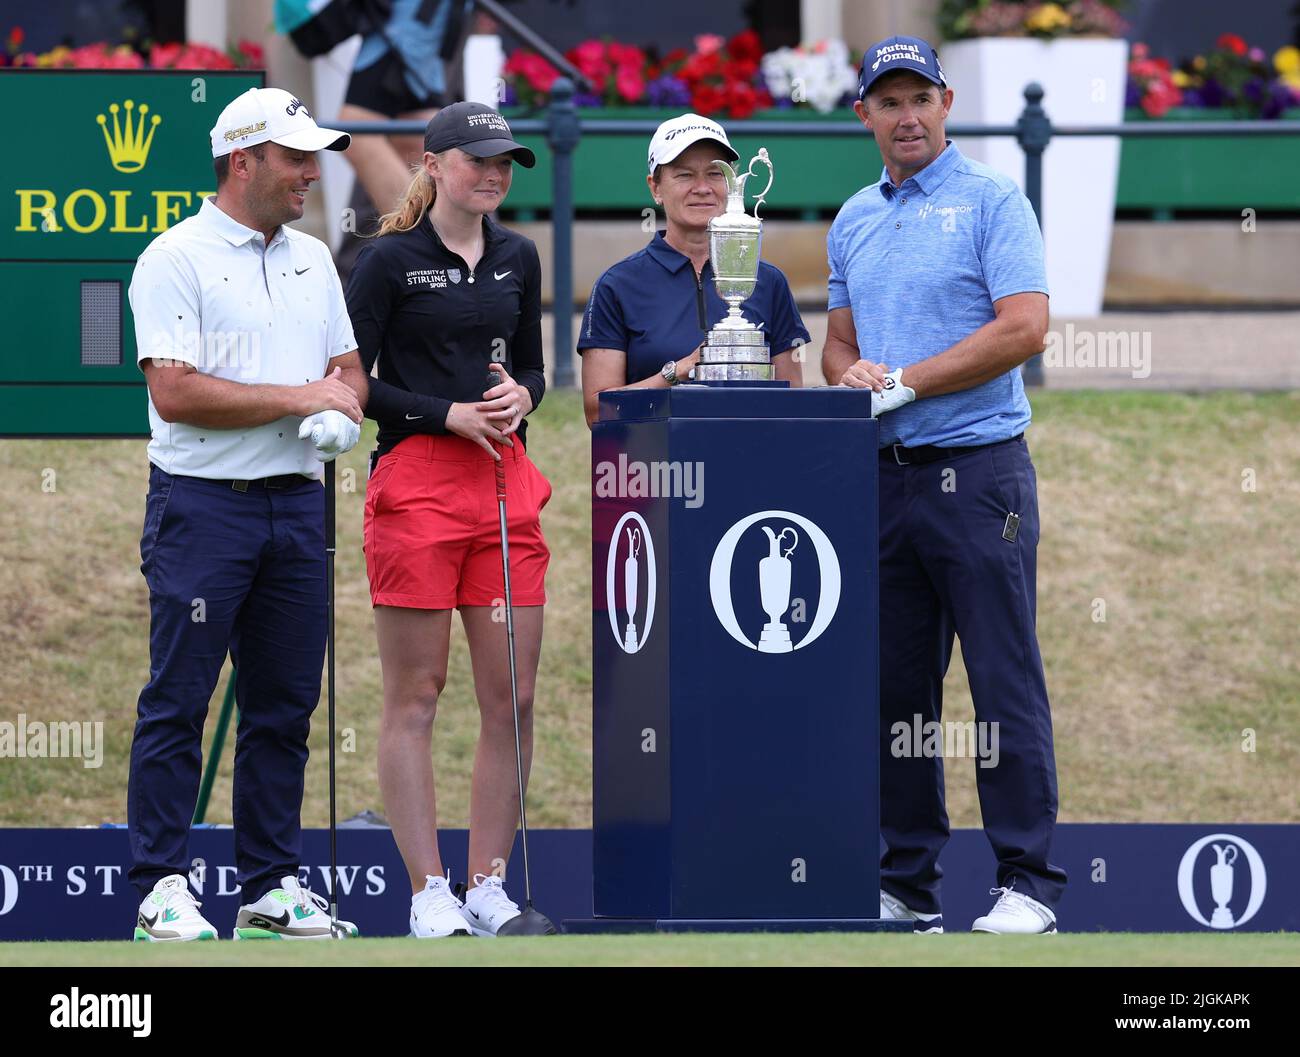 St Andrews, Fife, Scotland, UK. St Andrews, Fife, Scotland, UK. 11th July 2022, Old Course at St Andrews, St Andrews, Fife, Scotland; The Open Golf Championship pre-tournament activities; Francesco Molinari, Louise Duncan, Catriona Matthew and Padraig Harrington pose for a photo with the Claret Jug Credit: Action Plus Sports Images/Alamy Live News Credit: Action Plus Sports Images/Alamy Live News Stock Photo